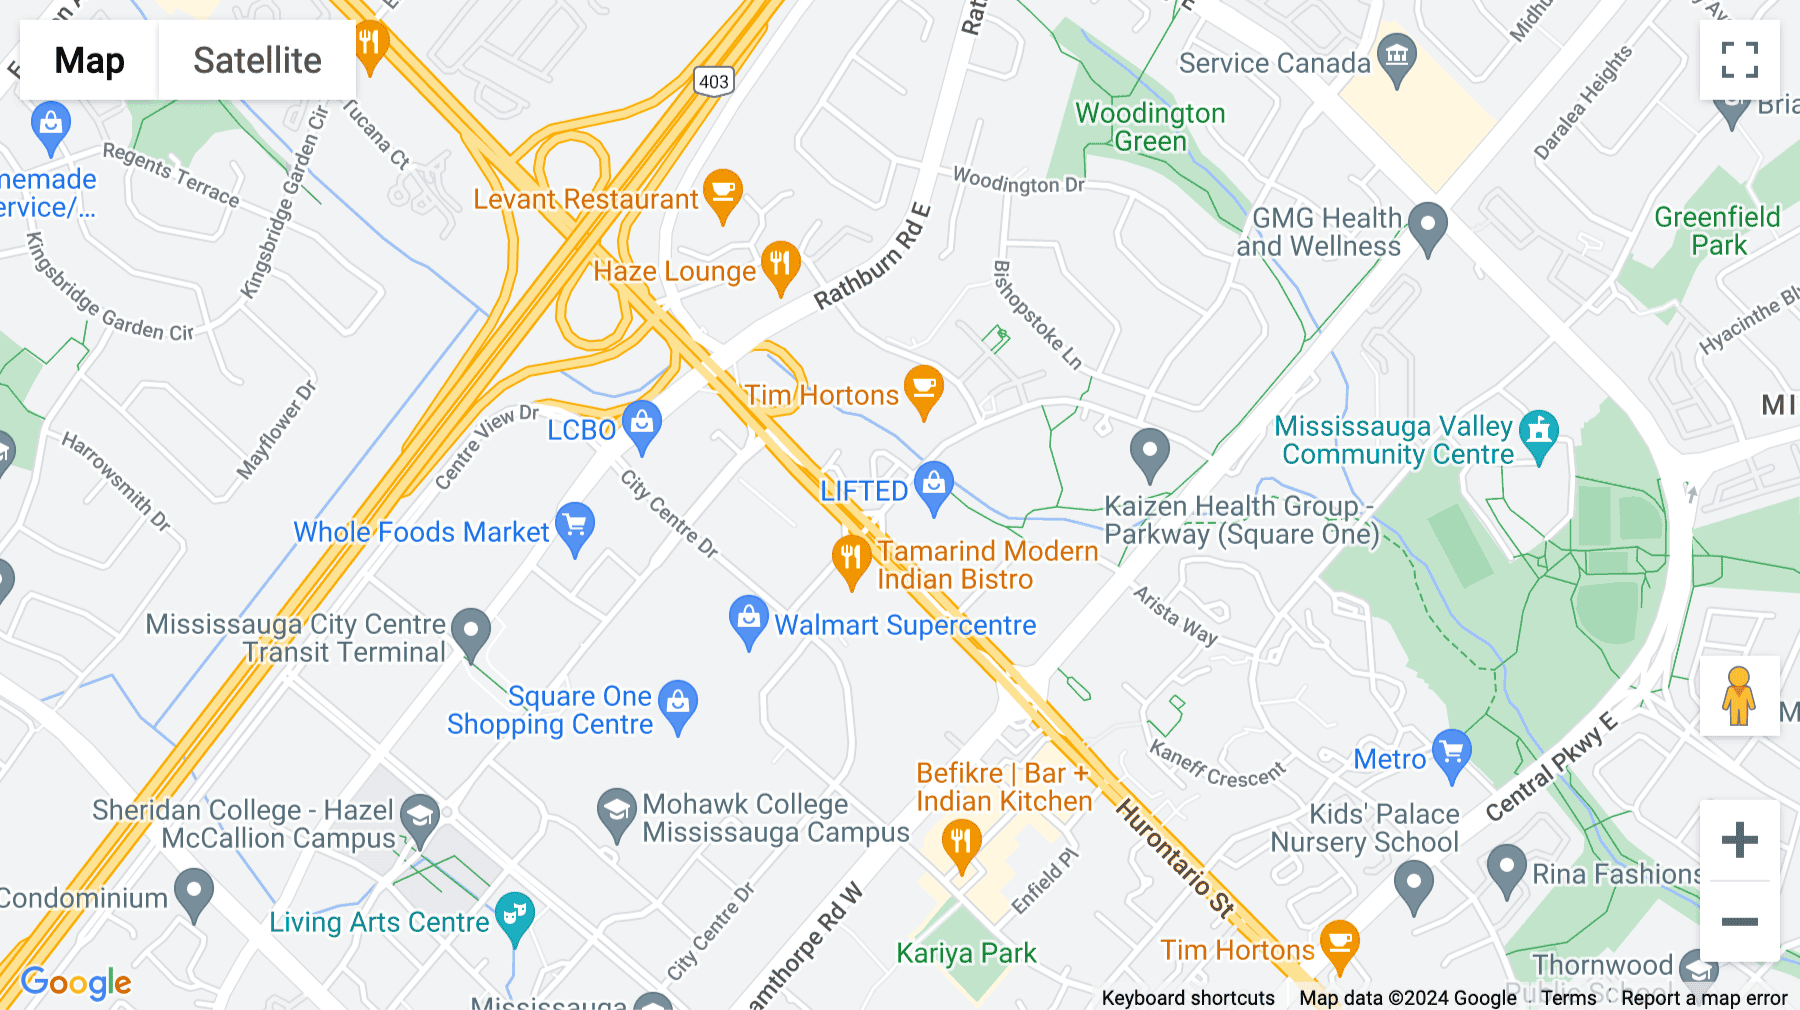 Click for interative map of Suite 750, 2 Robert Speck Parkway, Mississauga